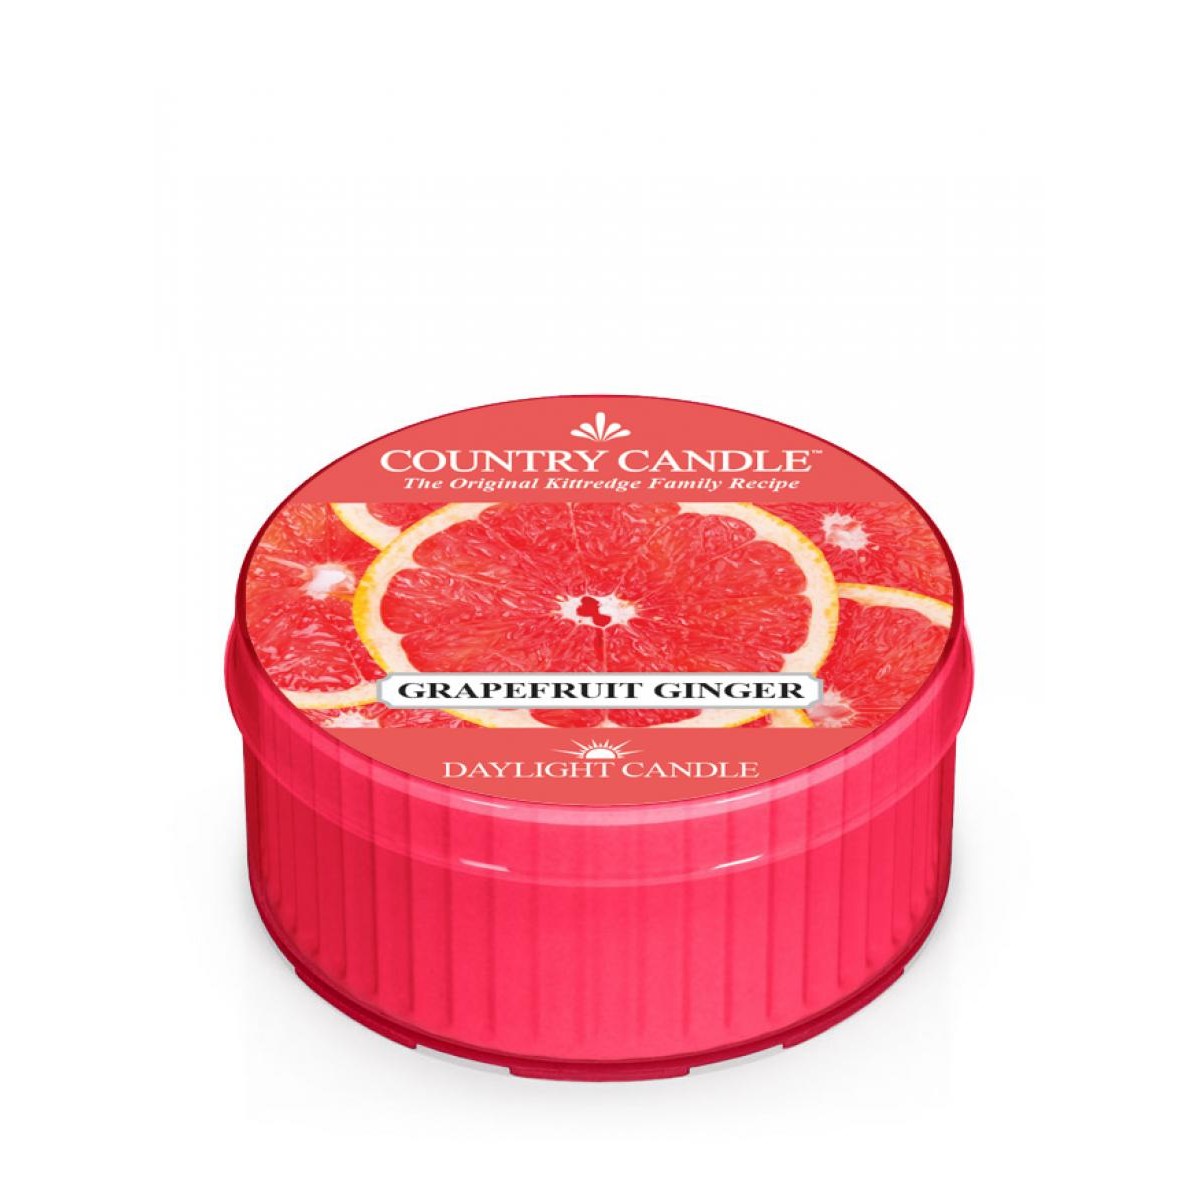 Daylight Grapefruit ginger-Country Candle